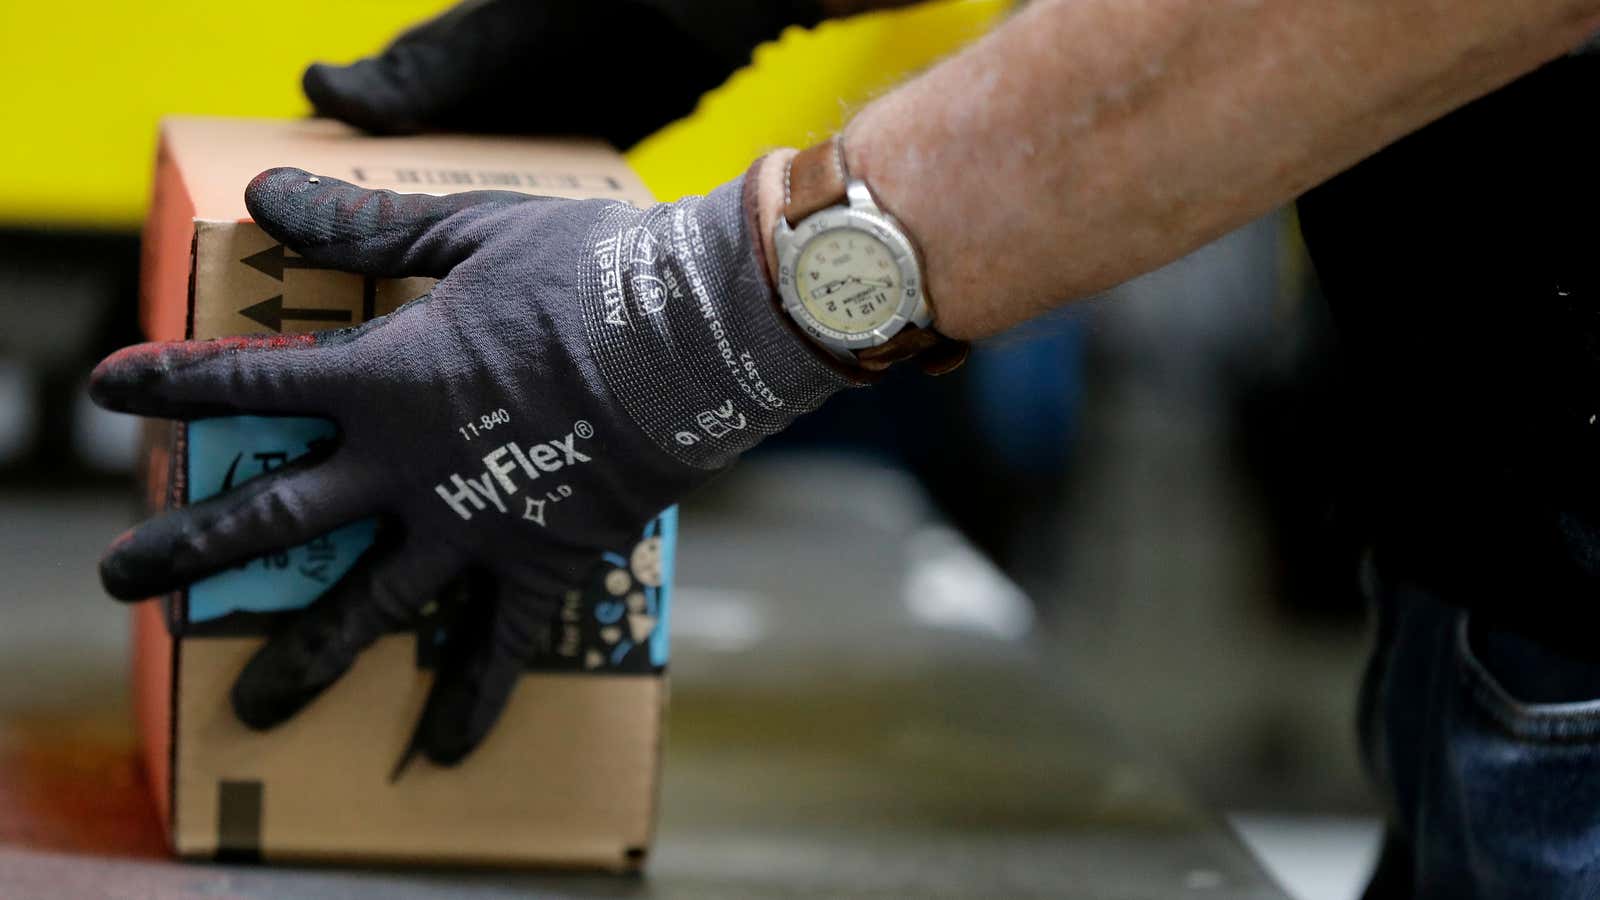 Amazon Says It Will Retrain Workers It’s Automating Out of Jobs. But Does 'Upskilling' Even Work?